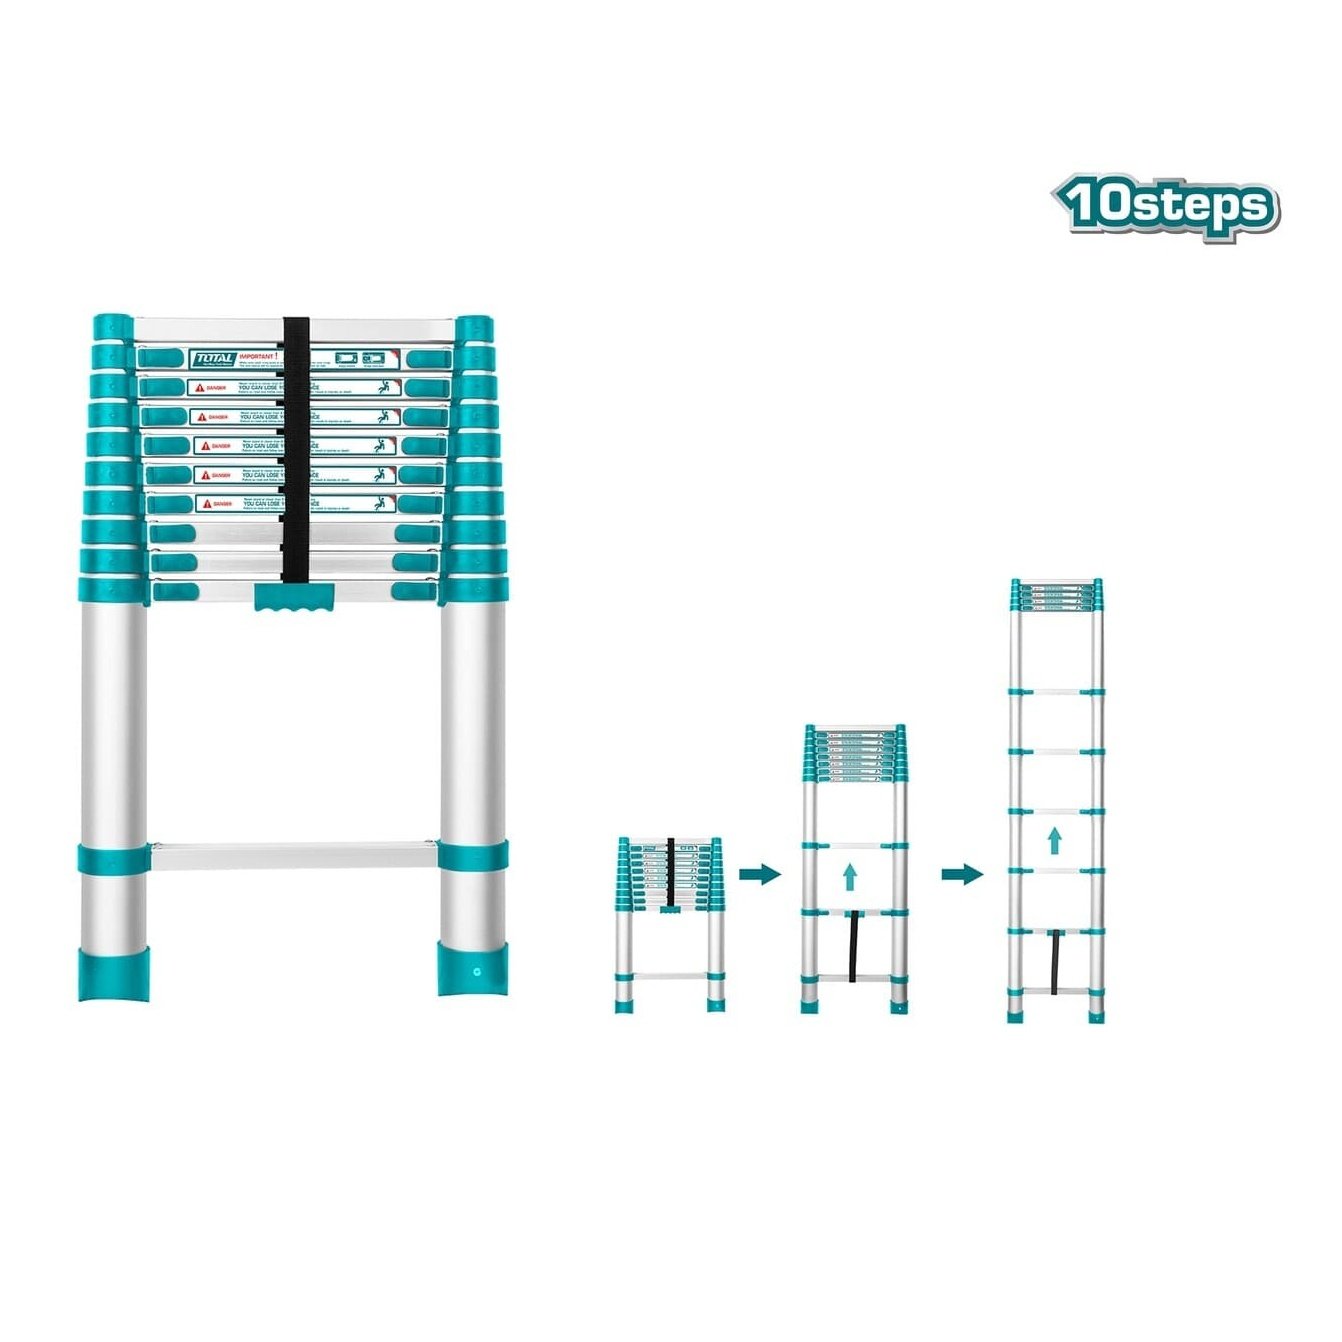 Total Telescopic Ladder 10 Steps - THLAD08101 | Supply Master | Accra, Ghana Ladder Buy Tools hardware Building materials